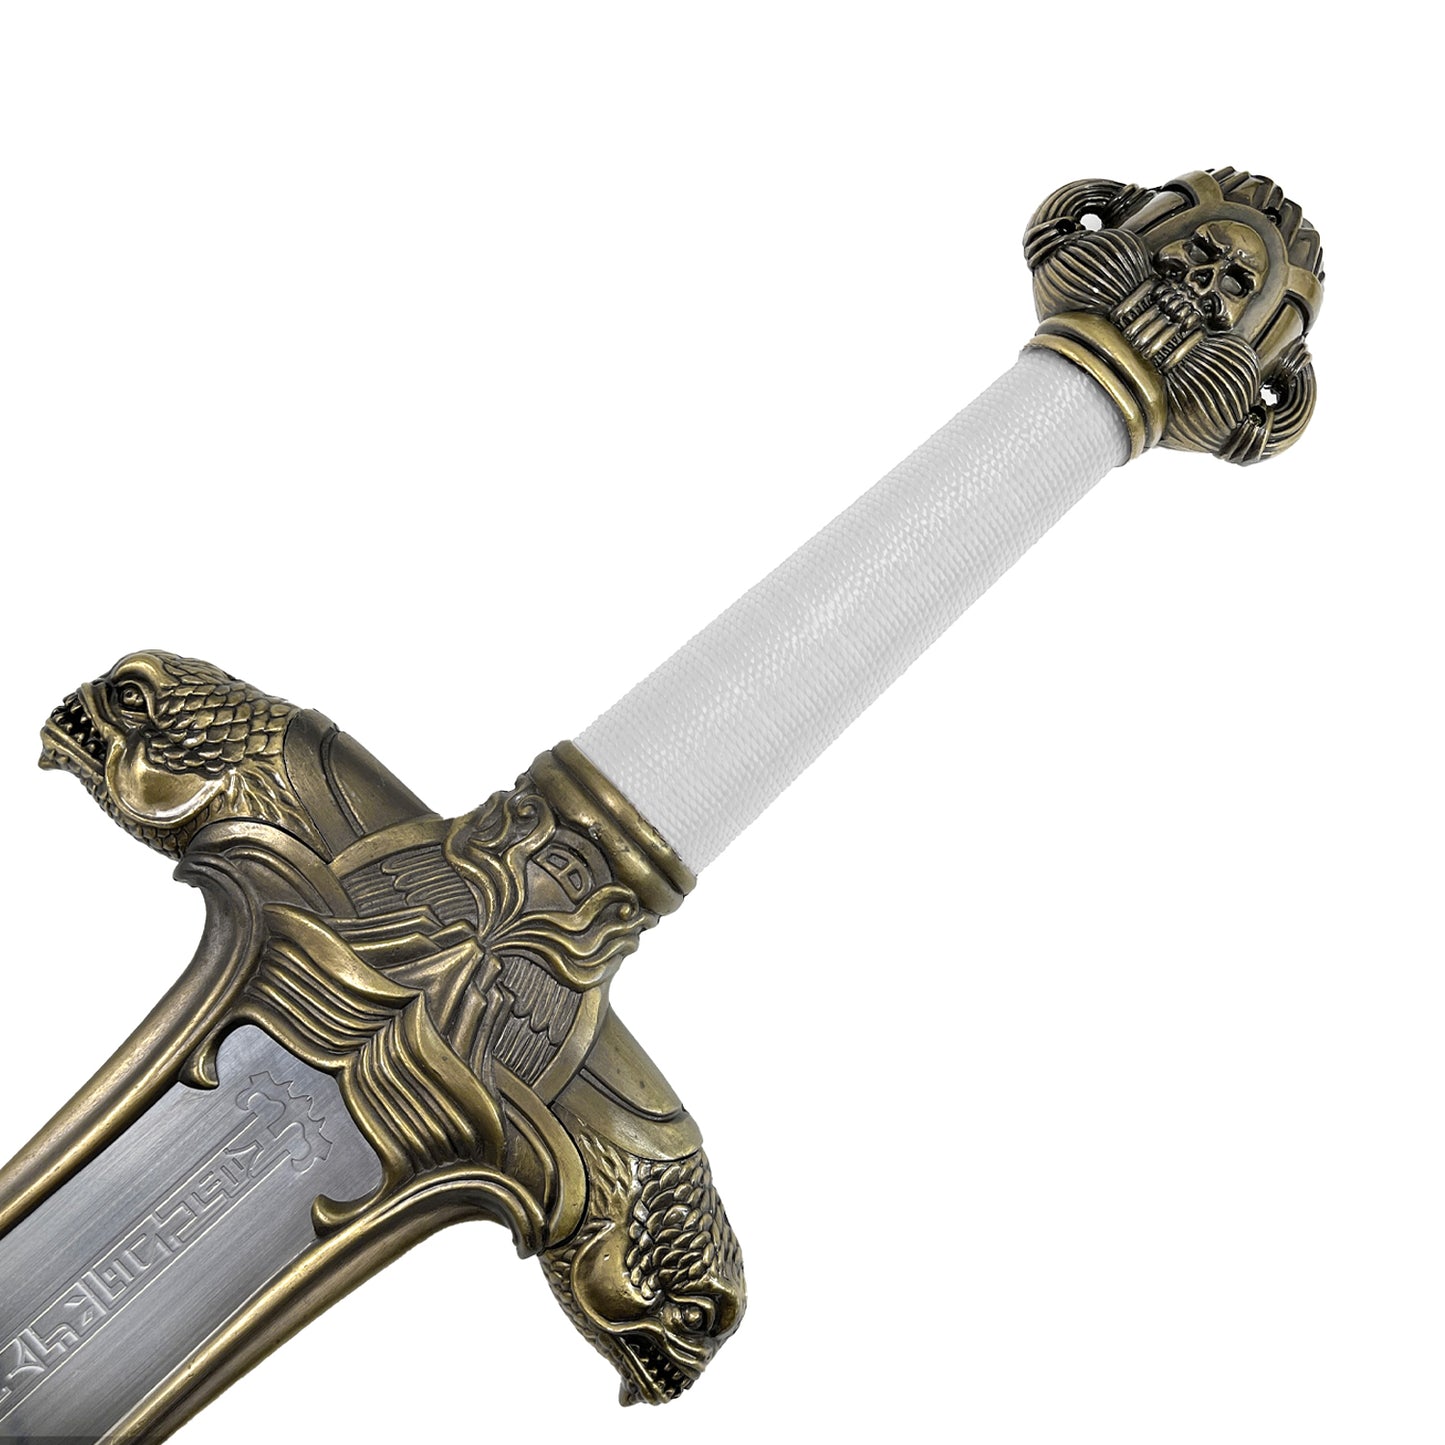 39" Barbarian Sword with Plaque.